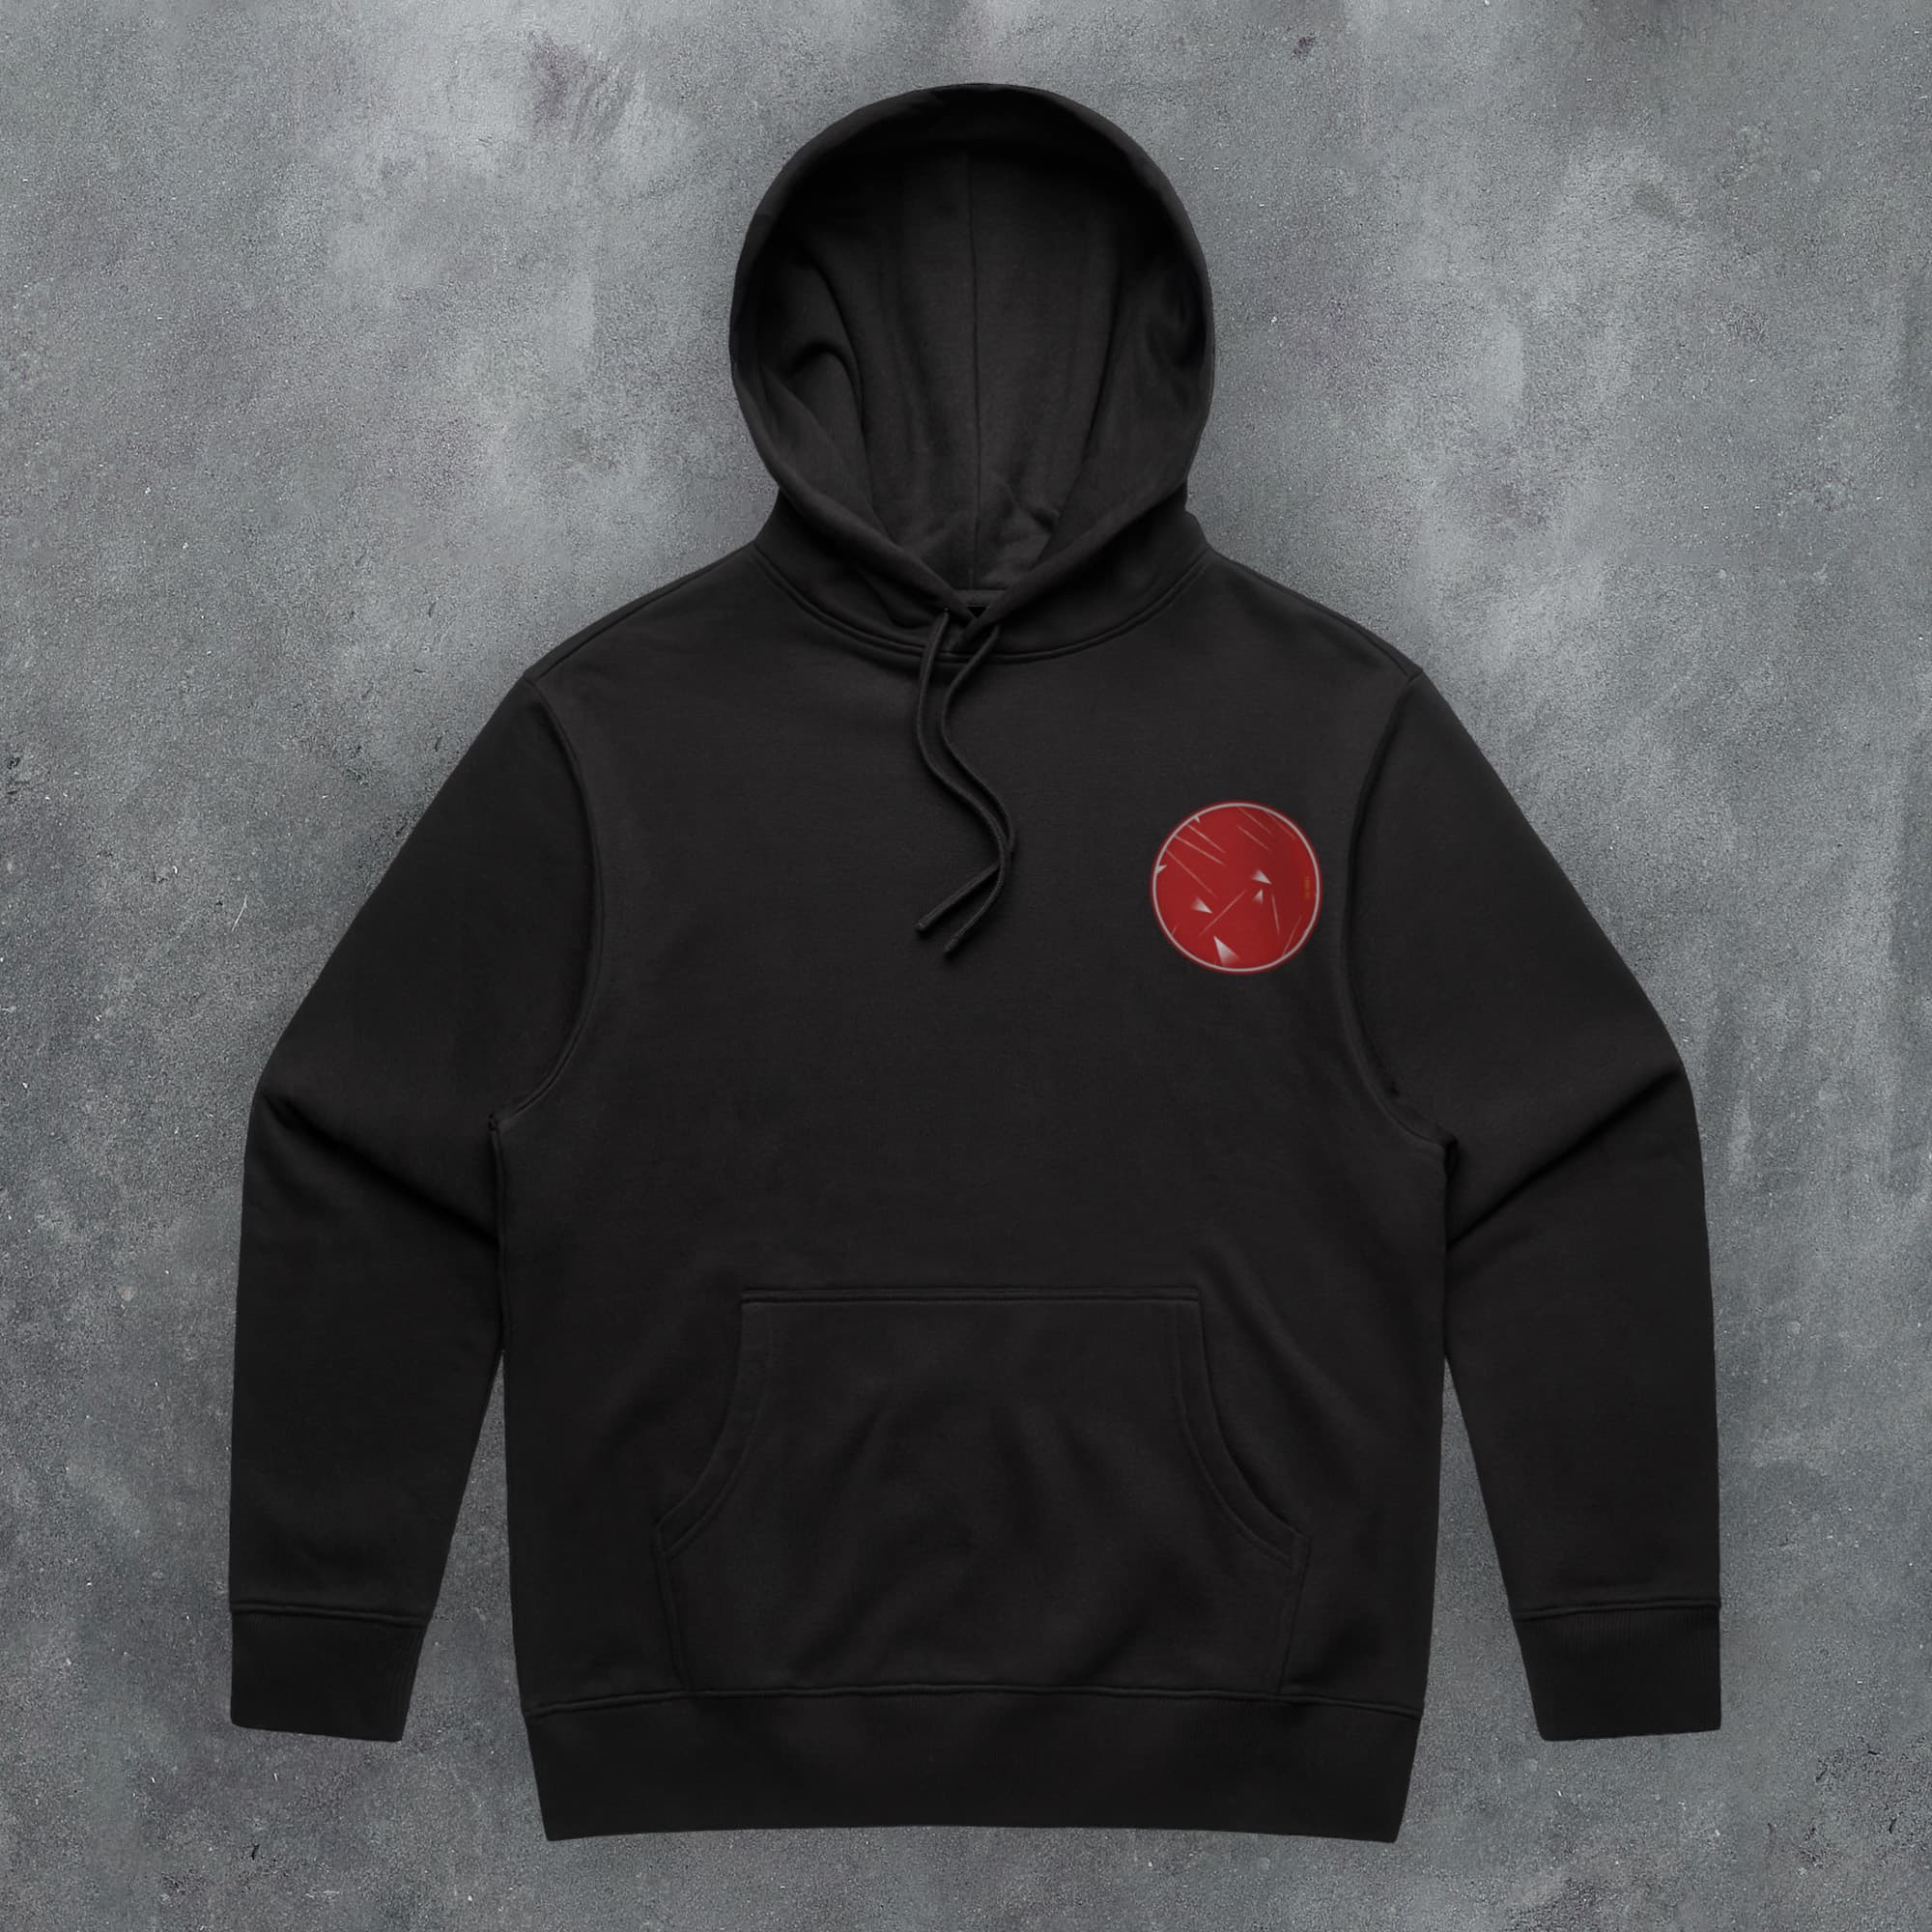 a black hoodie with a red smiley face on it